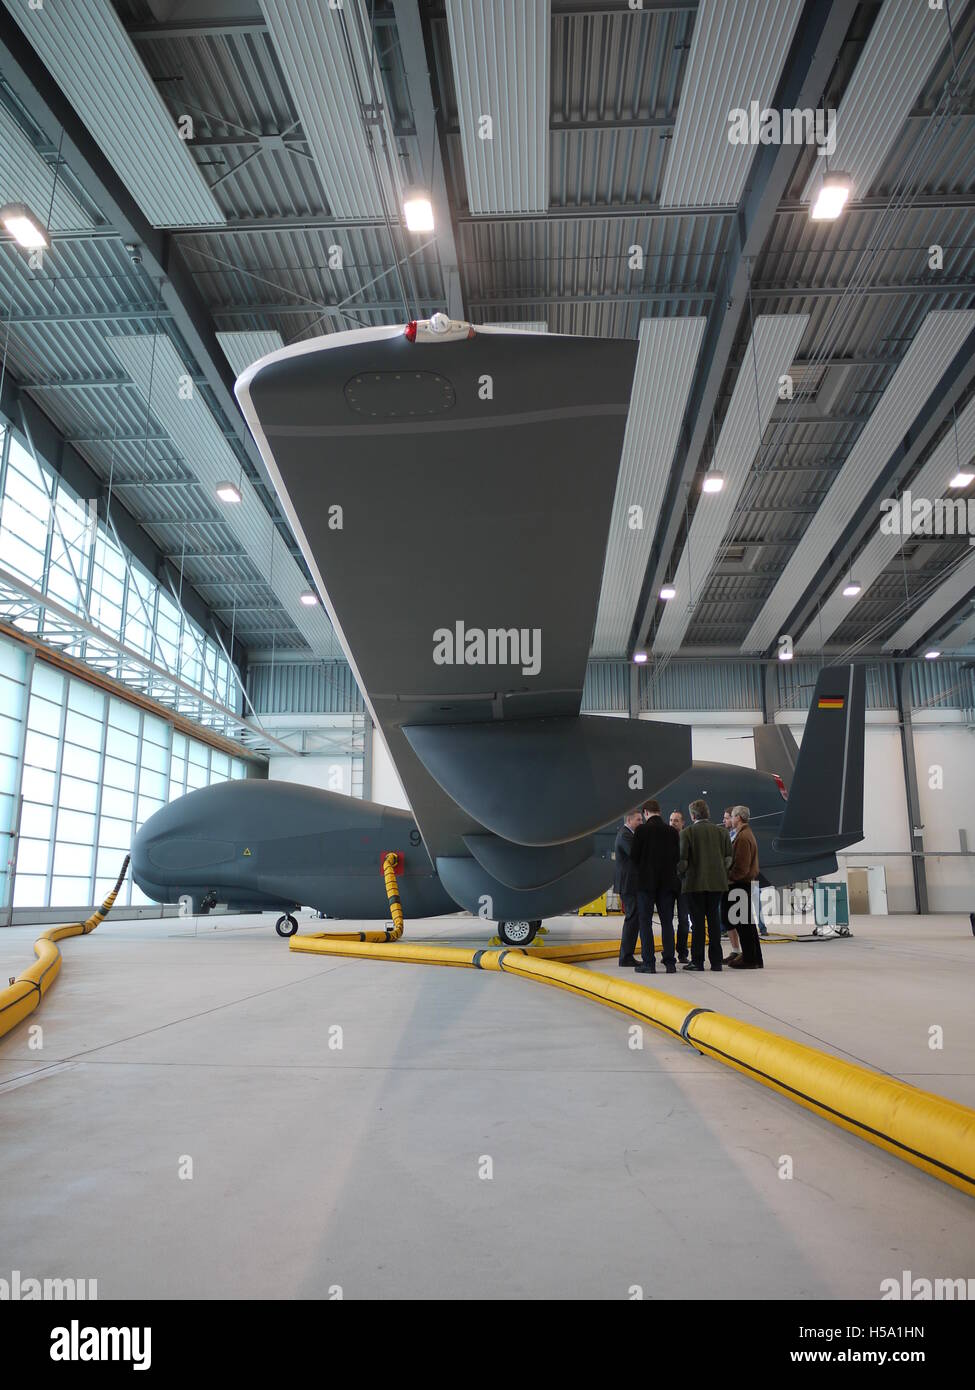 The Airbus Talarion, Medium-altitude long-endurance (MALE) unmanned air vehicle (UAV) waiting for essay in Germany Stock Photo